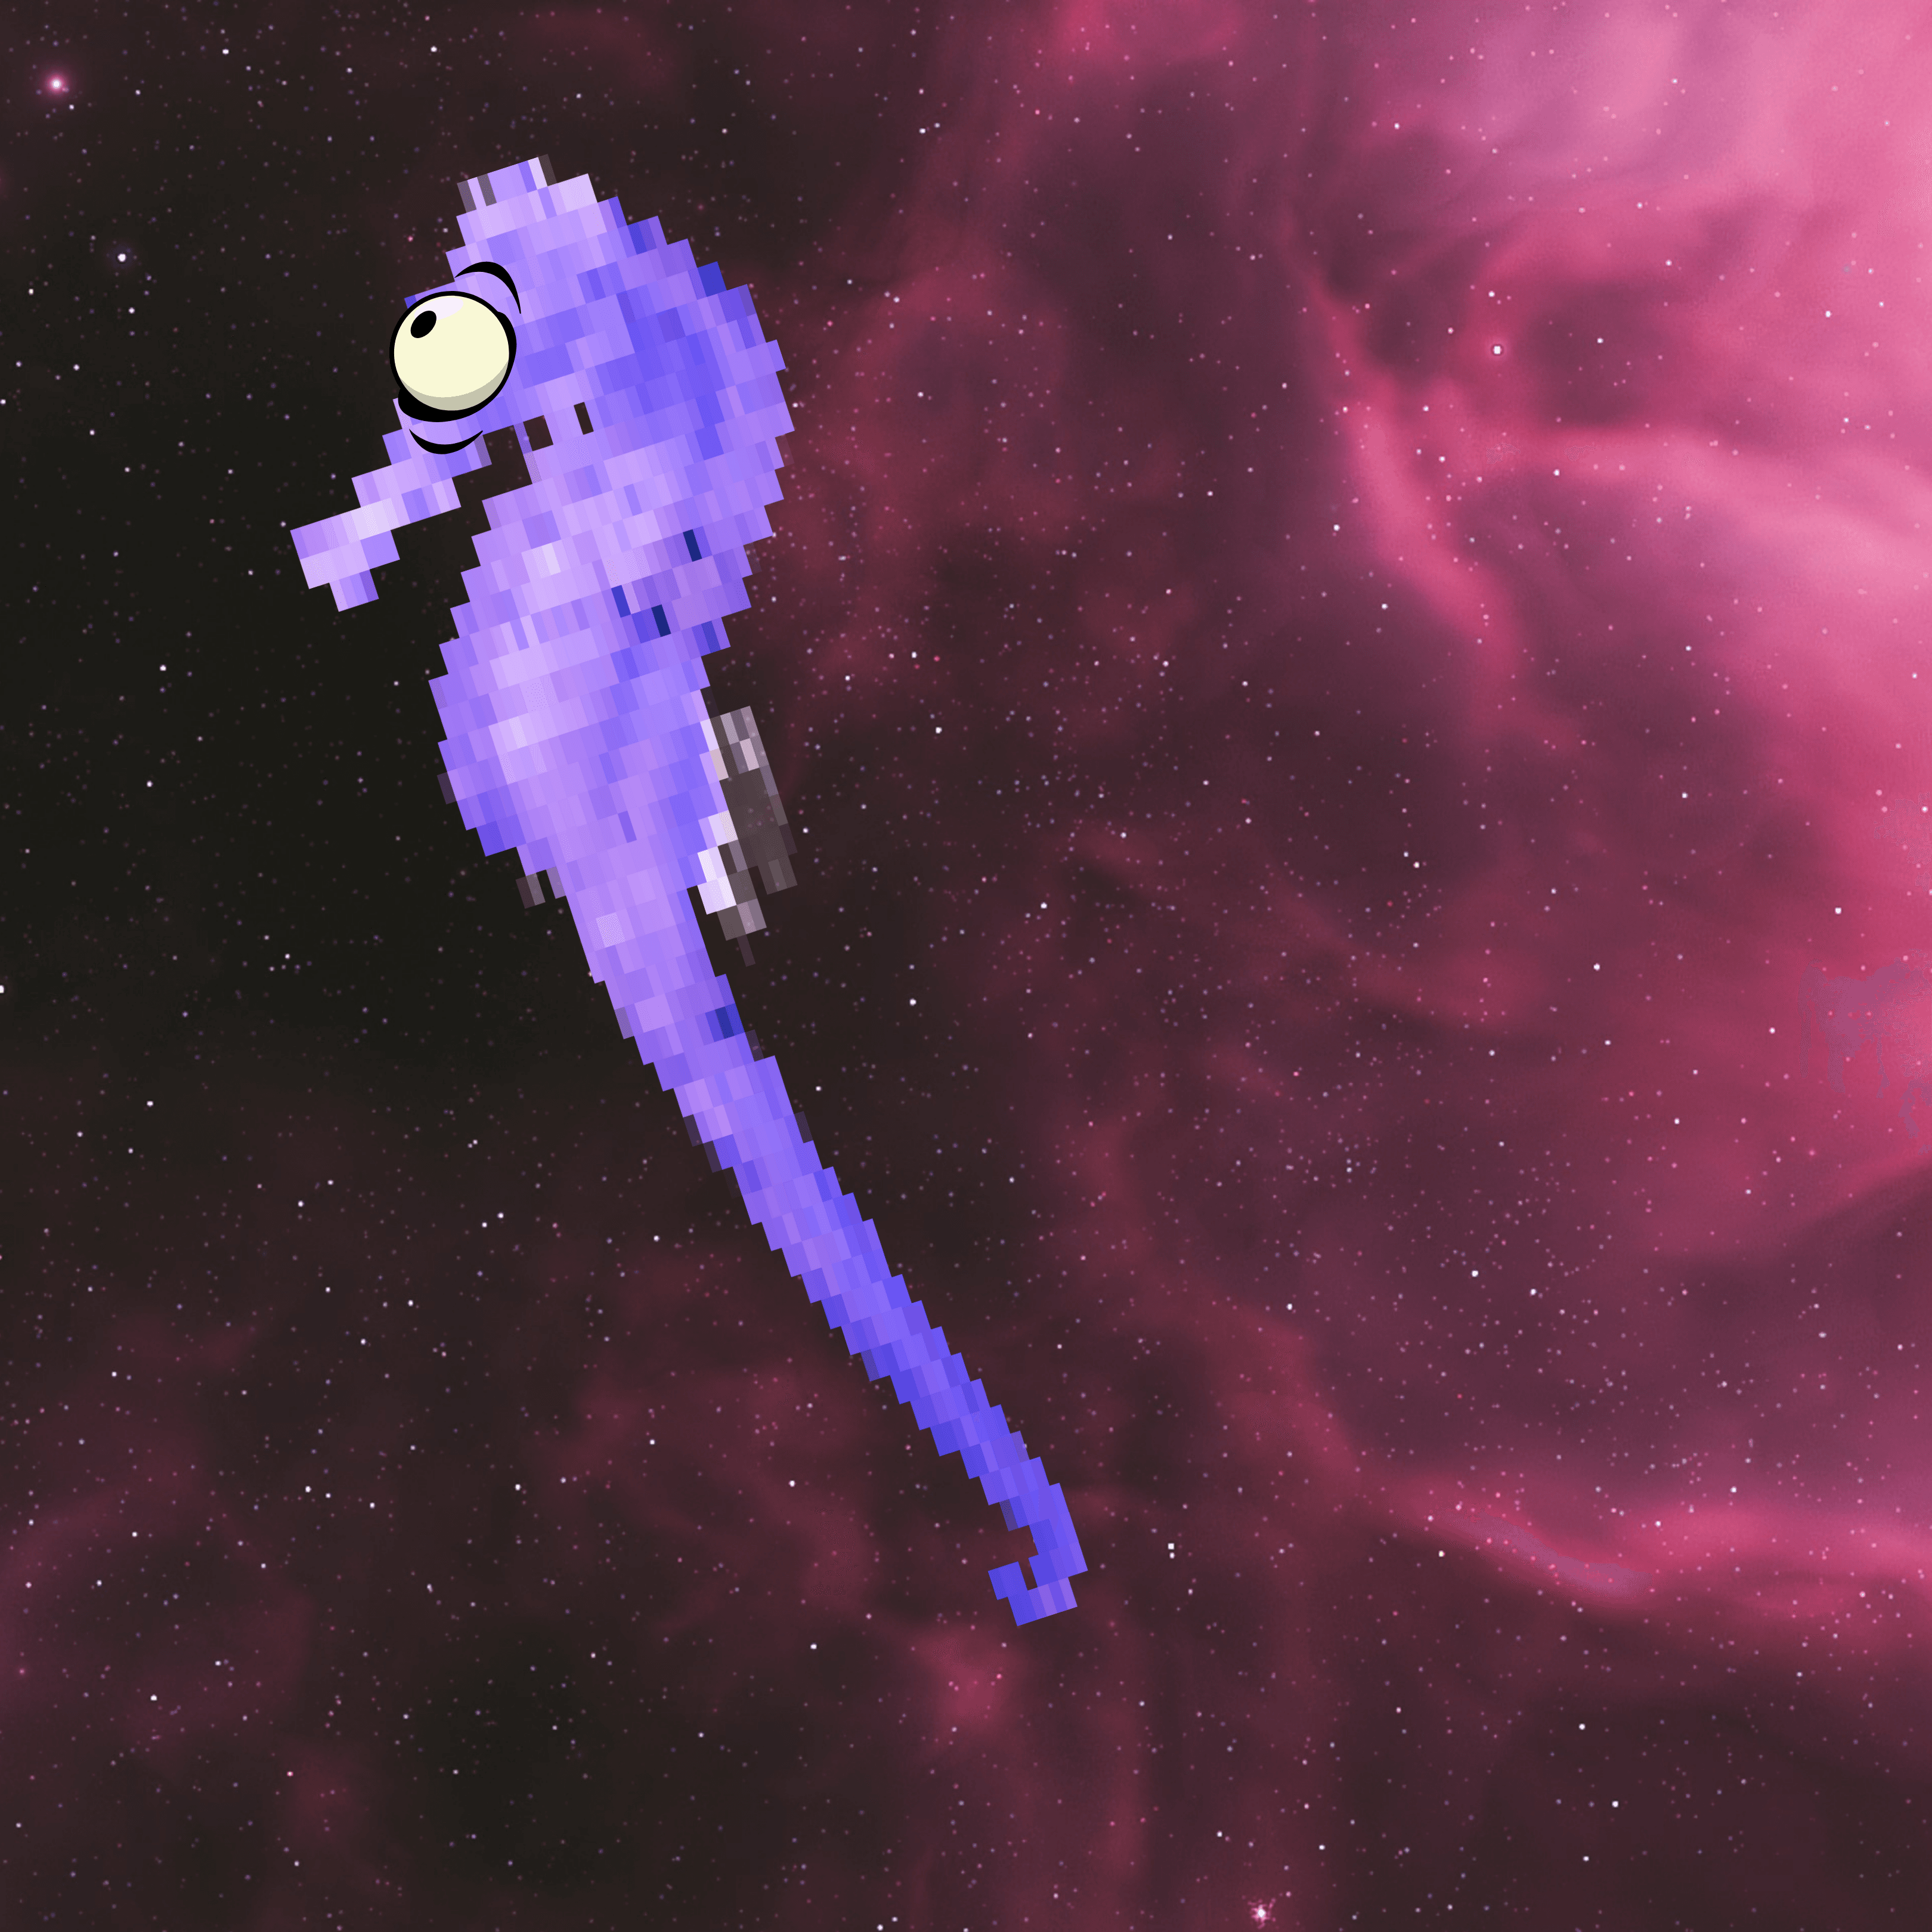 Seahorse in Space XI